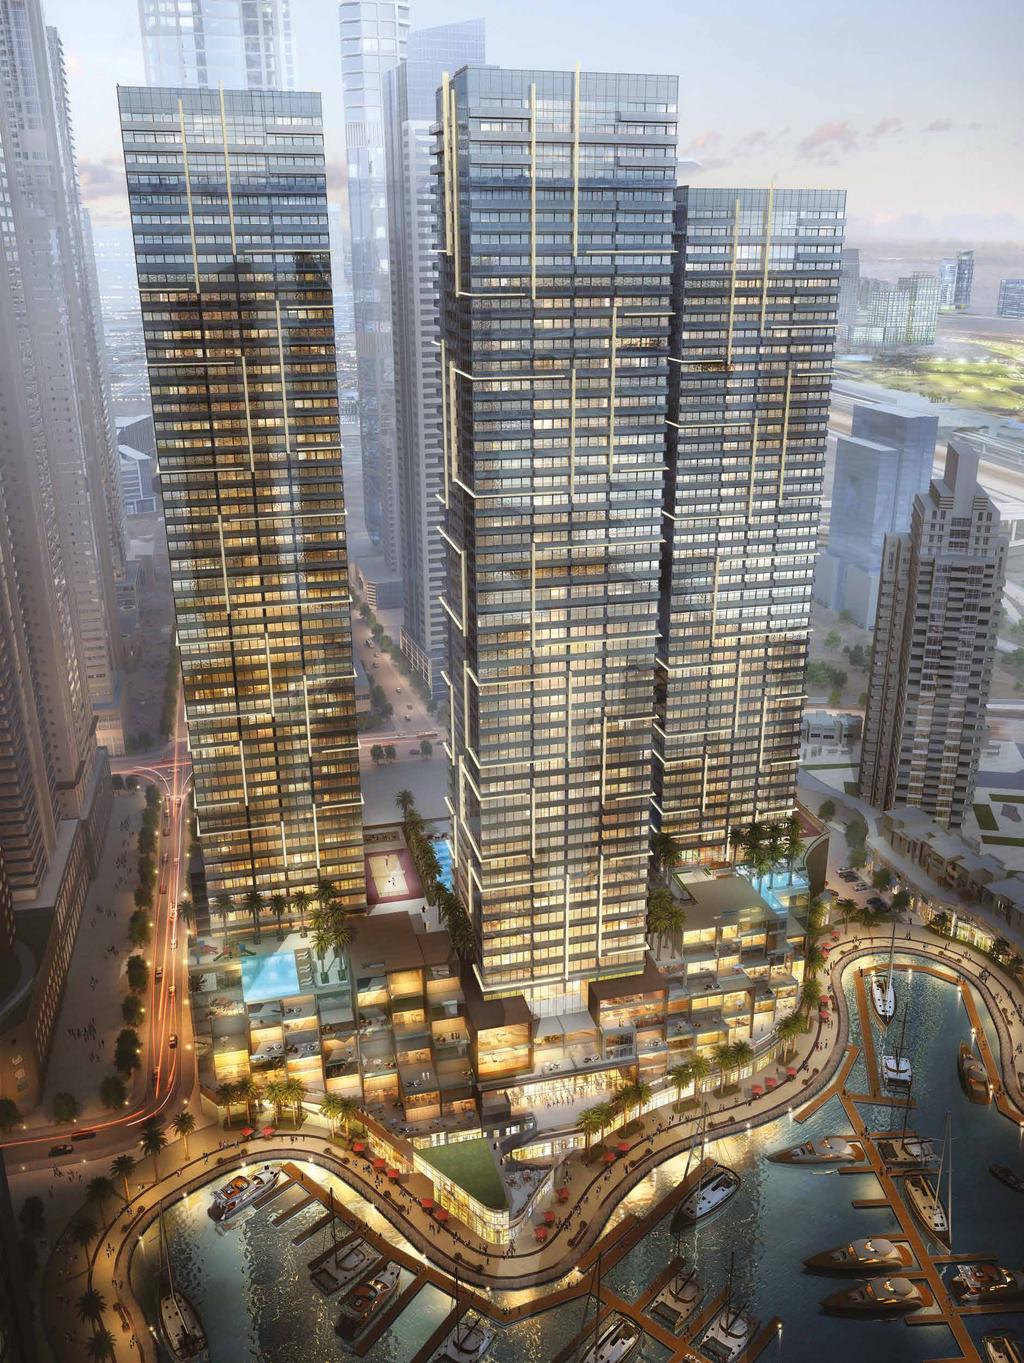 LIFESTYLE LOCATION LUXURY Contents Dynamic Dubai Unrivalled Location Introducing The Residences at Marina Gate Breathtaking Views The Residences The Lifestyle